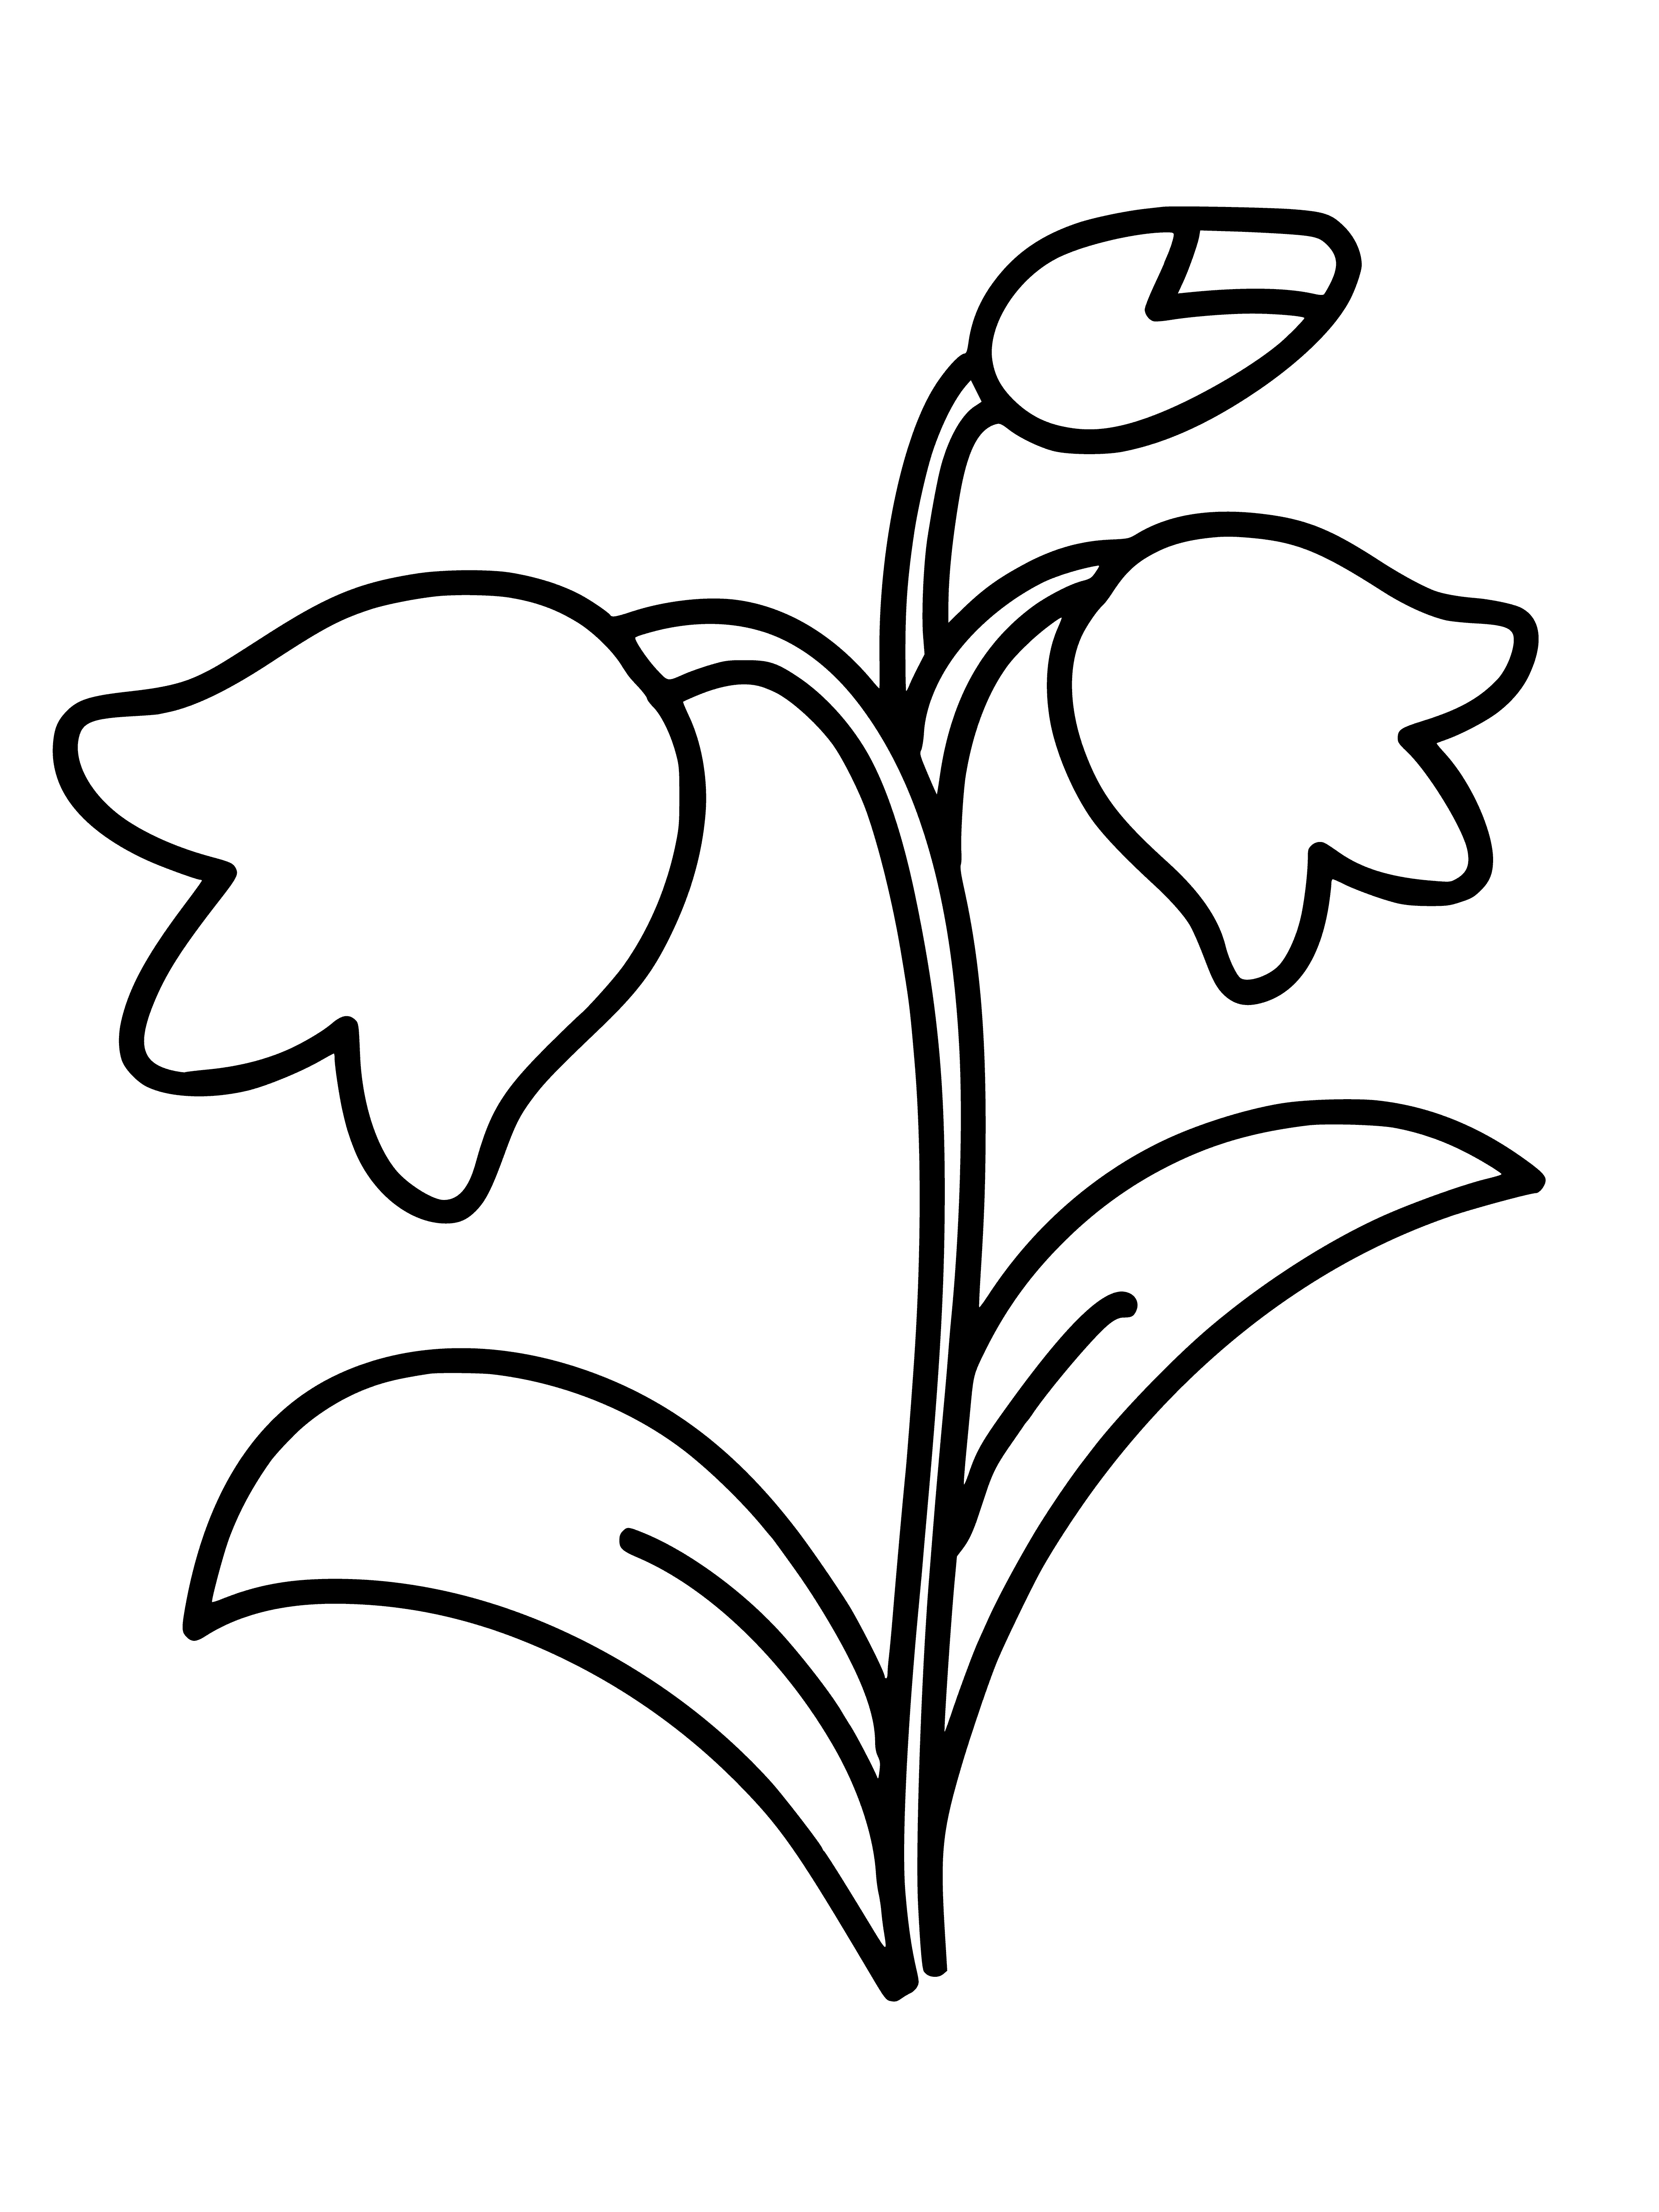 Bell coloring page